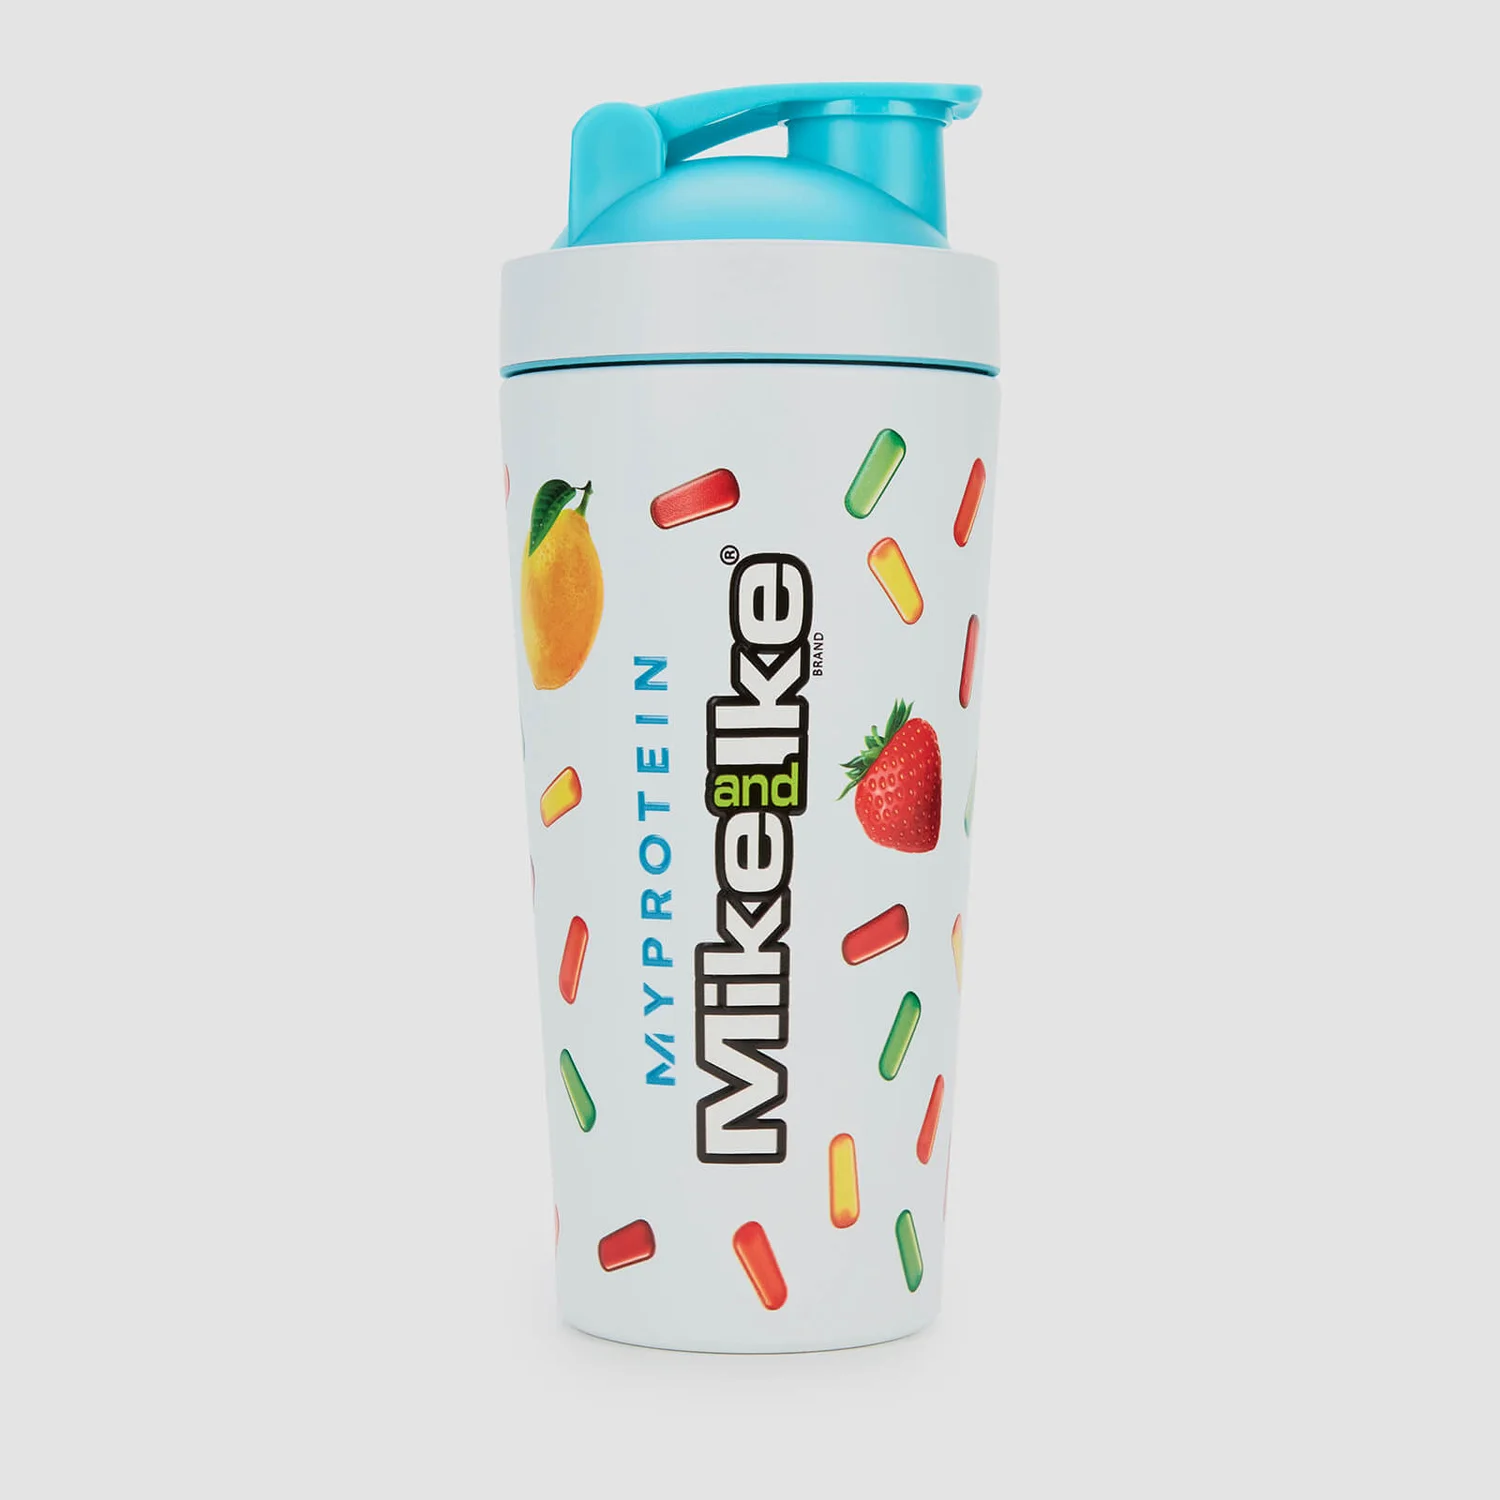 Myprotein x MIKE AND IKE® Shaker
					
					| MYPROTEIN™